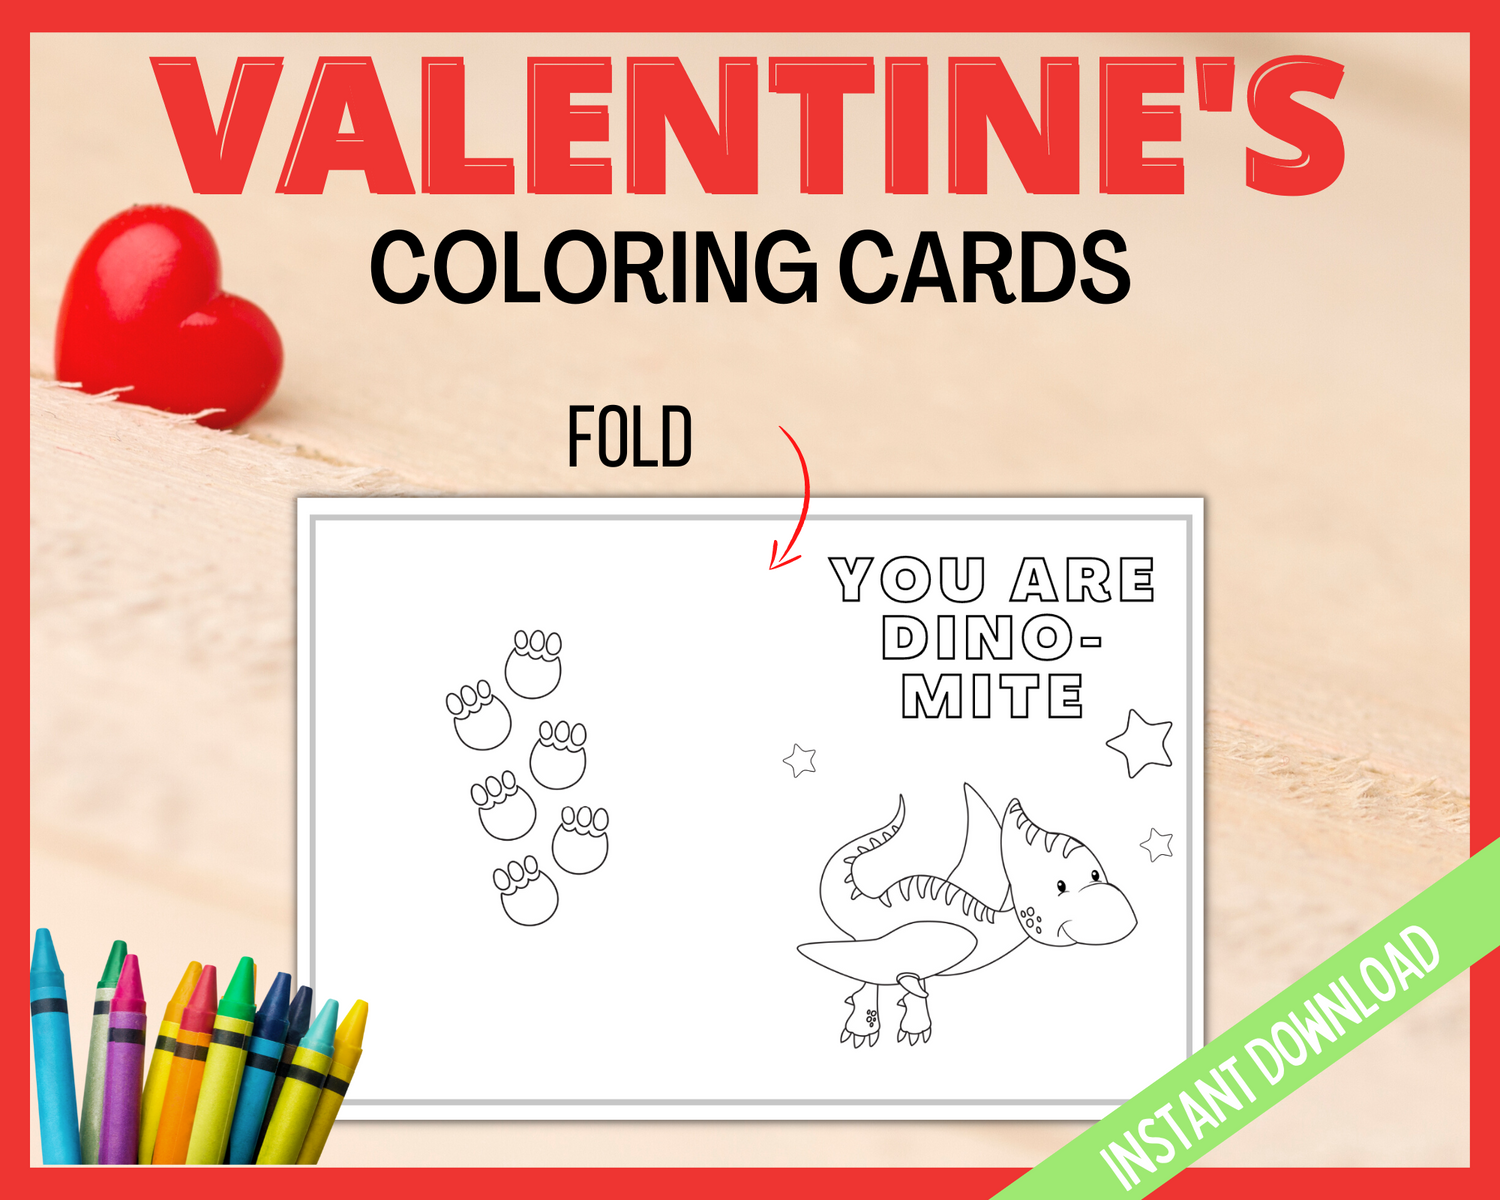 Dinosaur coloring cards for valentines day kids